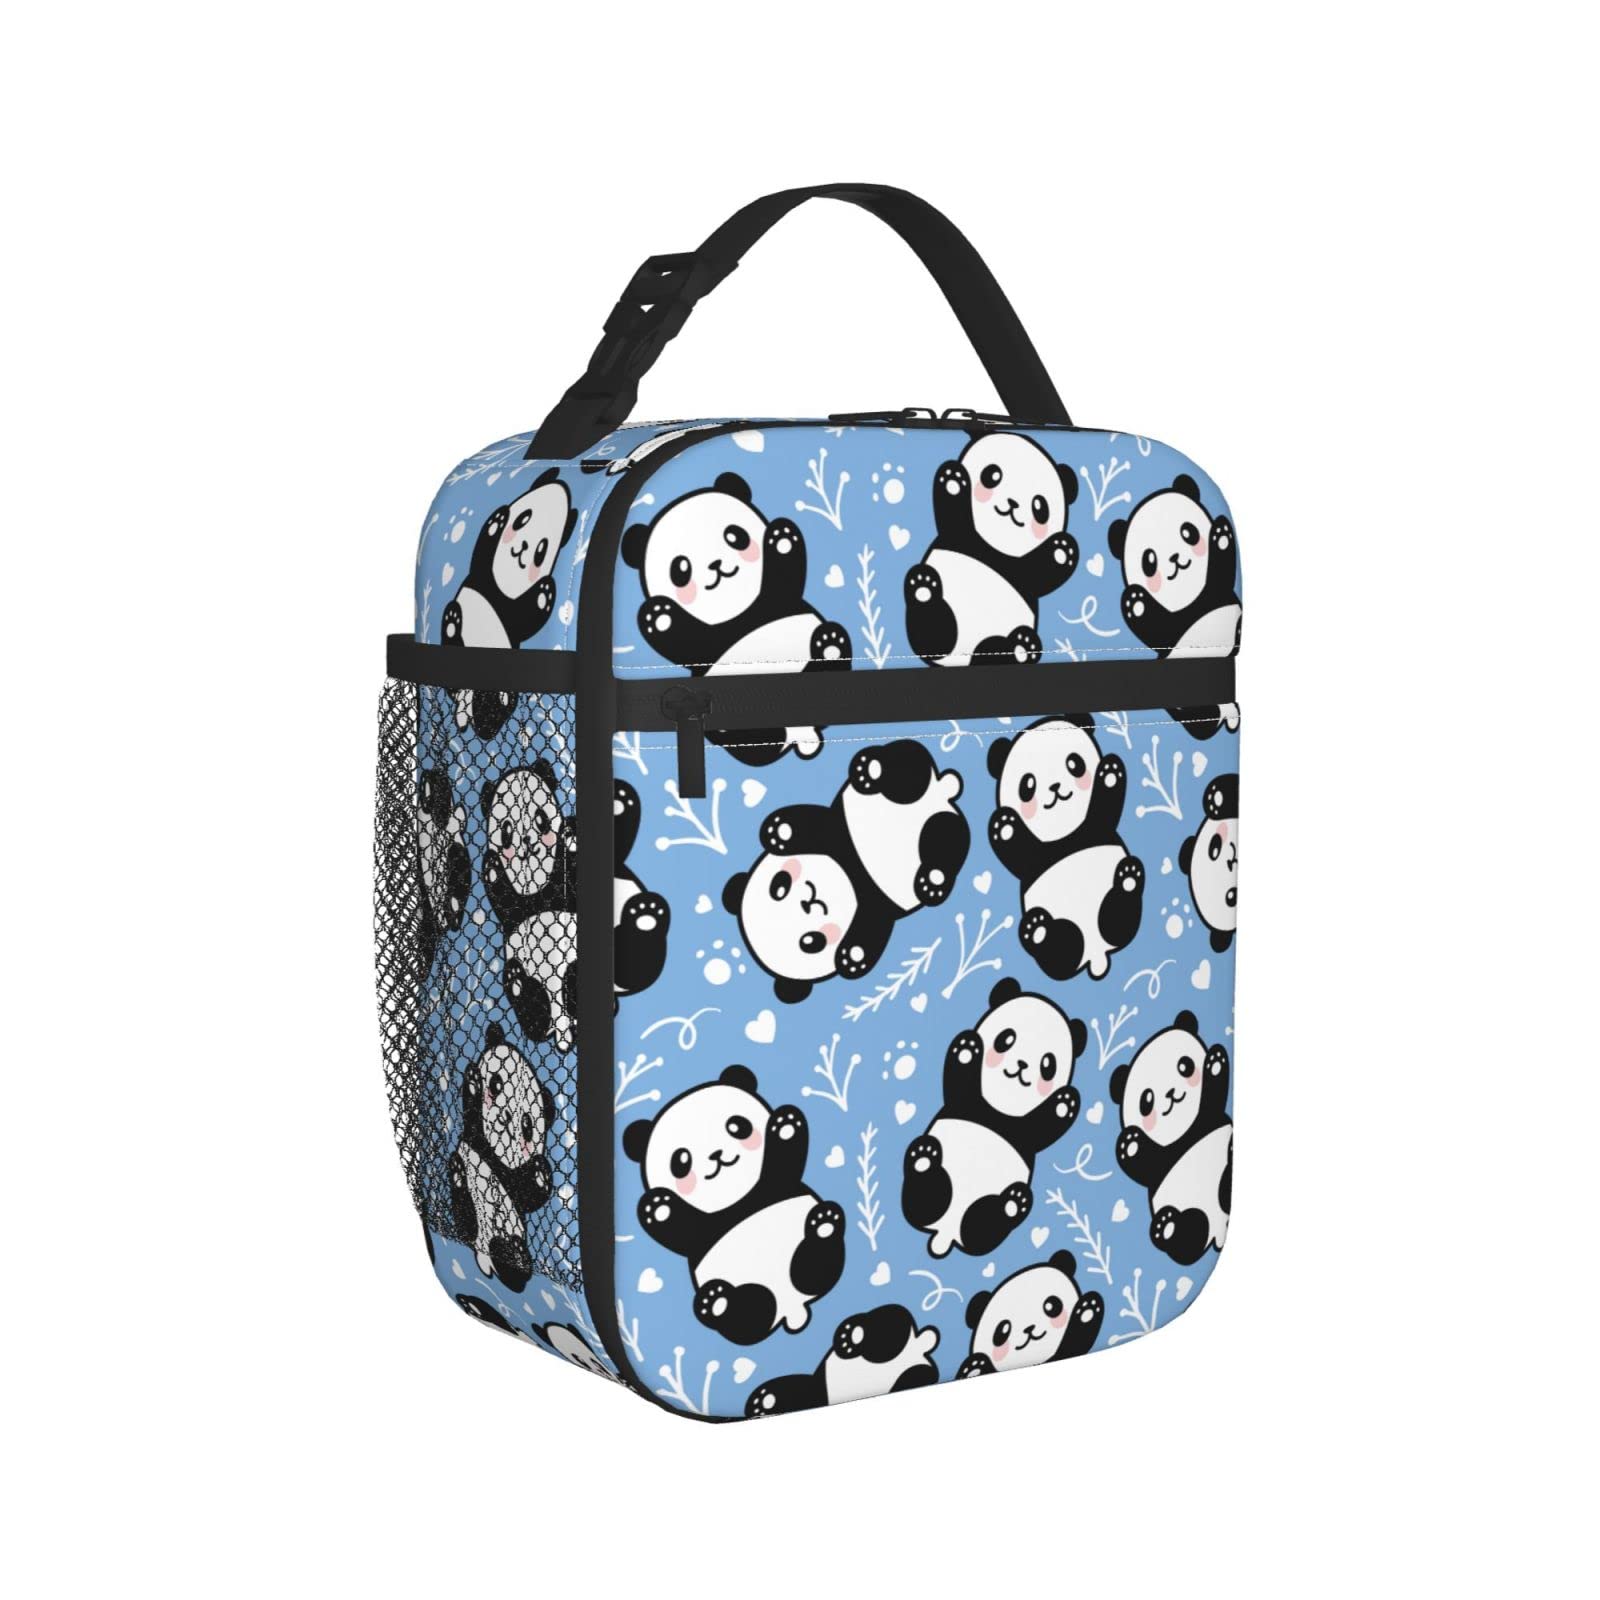 koniqiwa Cute Panda Lunch Box Insulated Lunch Bag Detachable Handle Lunchbox Thermal Meal Tote Bag For Travel Picnic Office Work Outdoor